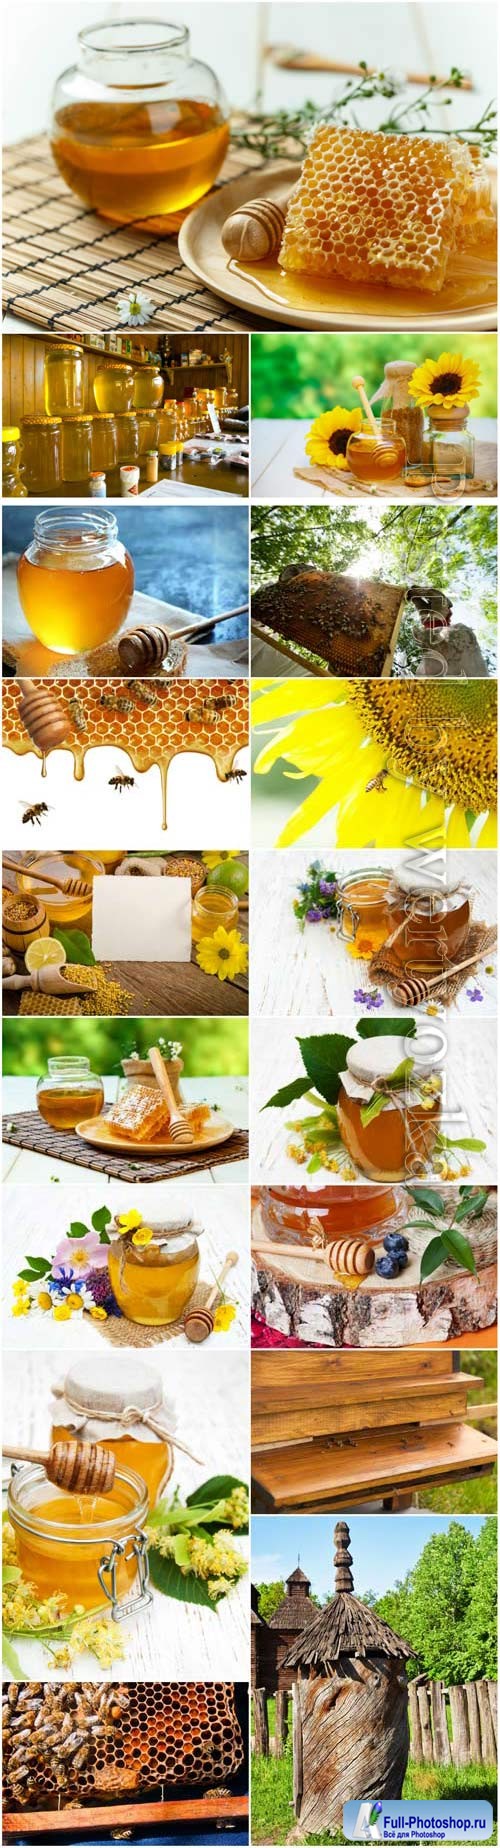 Bees and honey stock photo